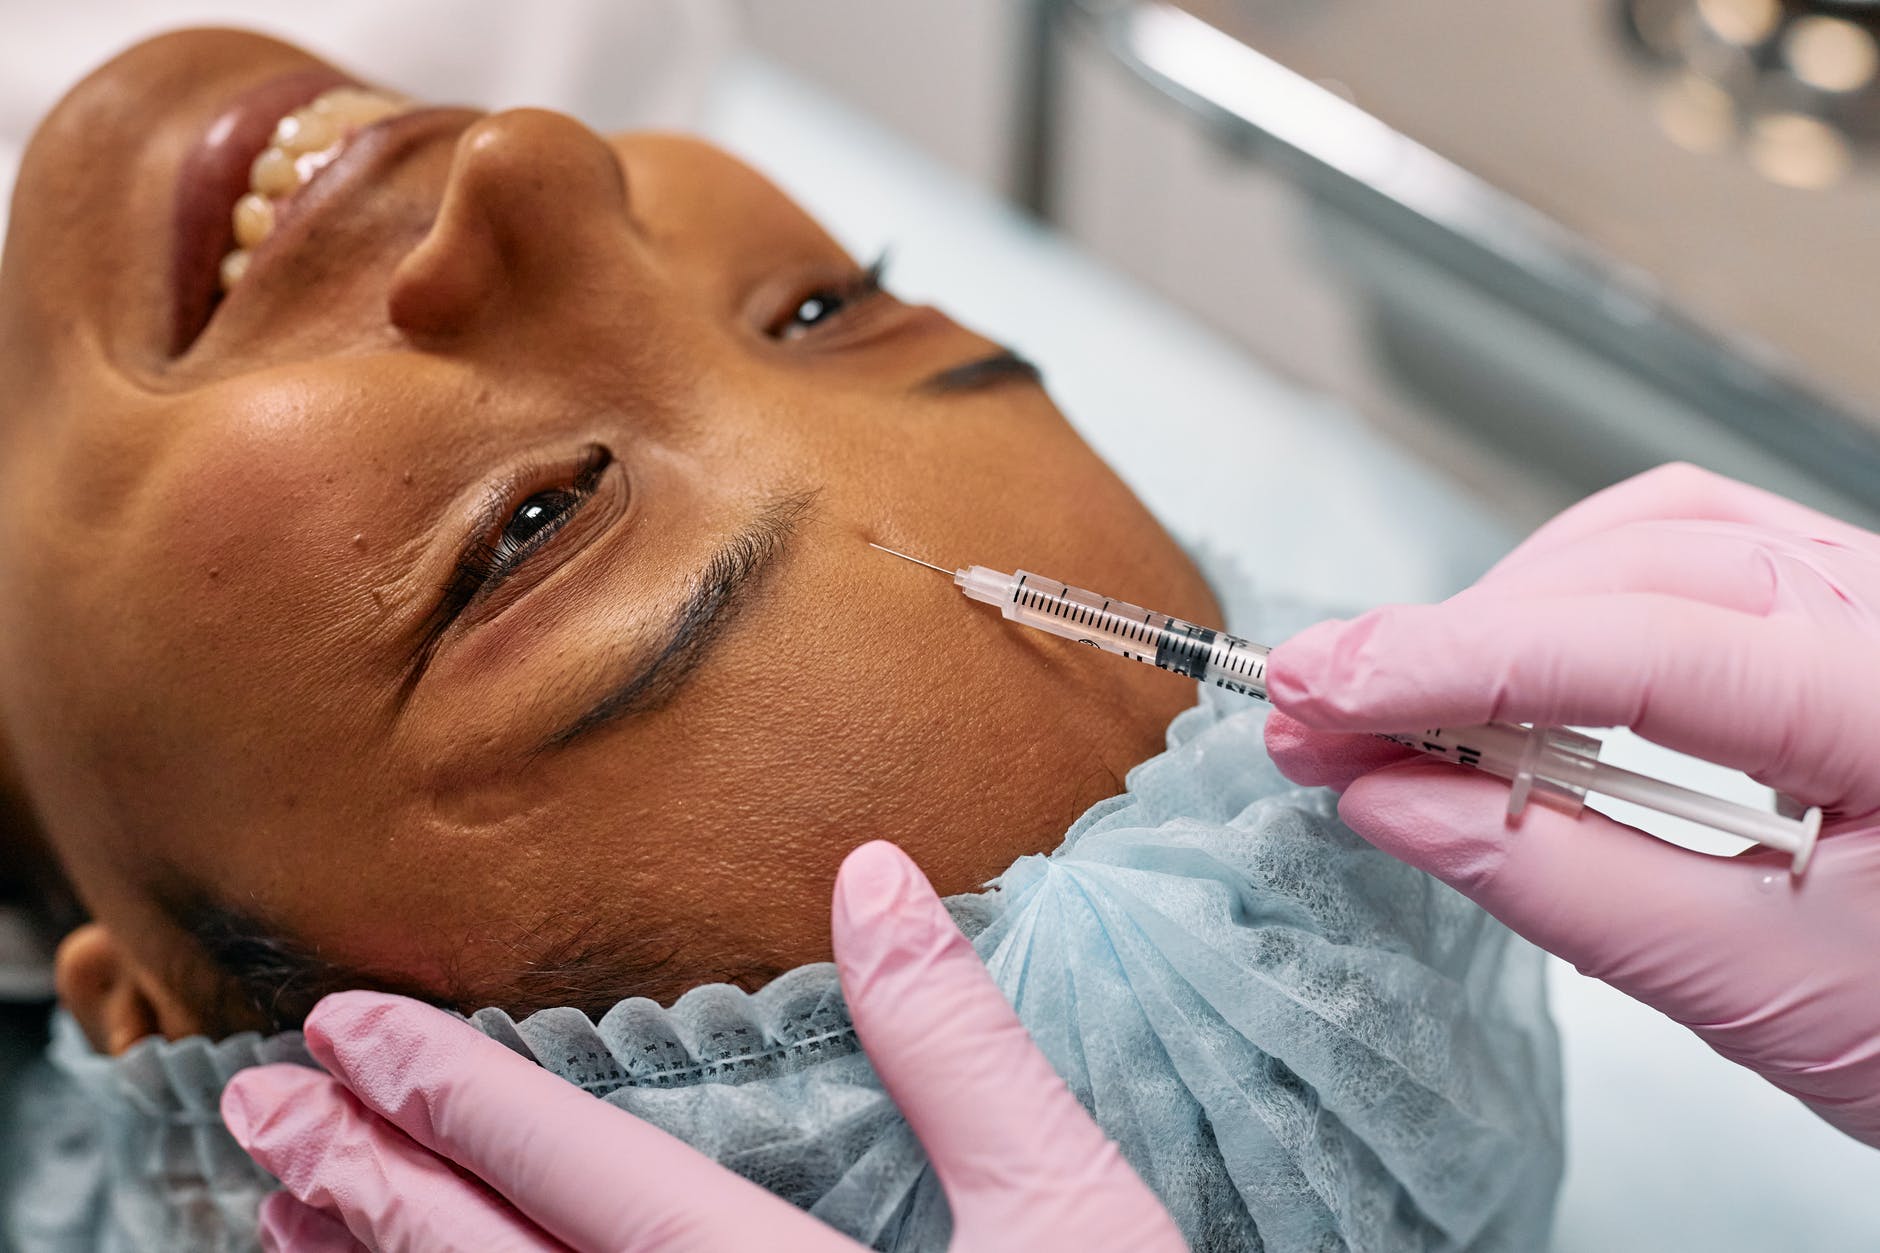 How Long Does Botox Last and When Do You Refill?